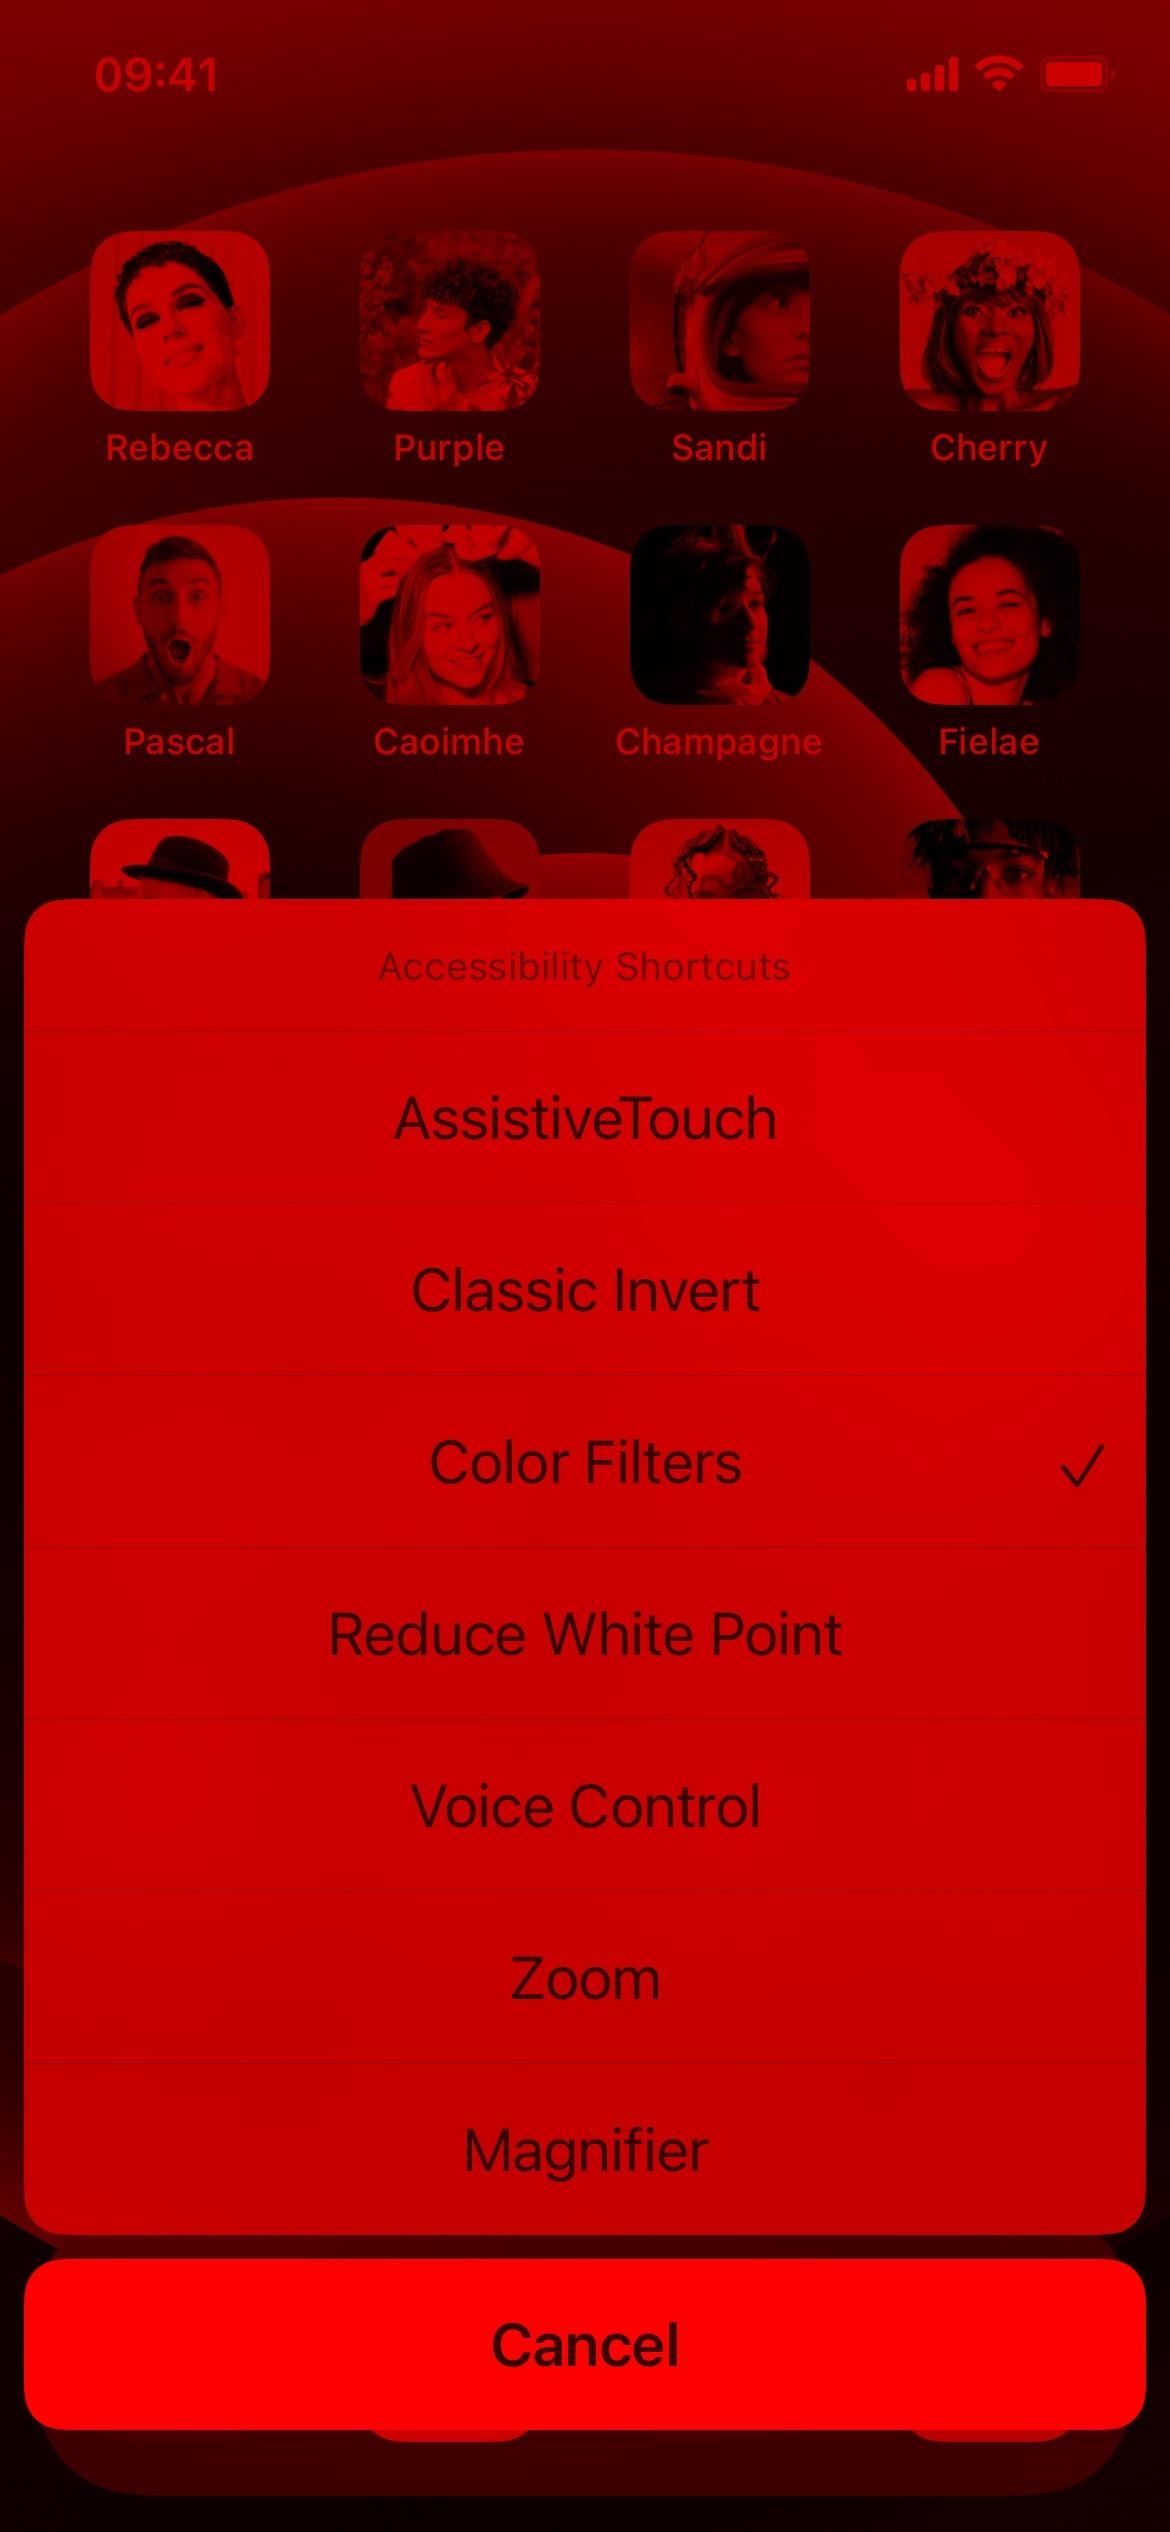 Keep Your Night Vision Sharp with the iPhone's Hidden Red Screen